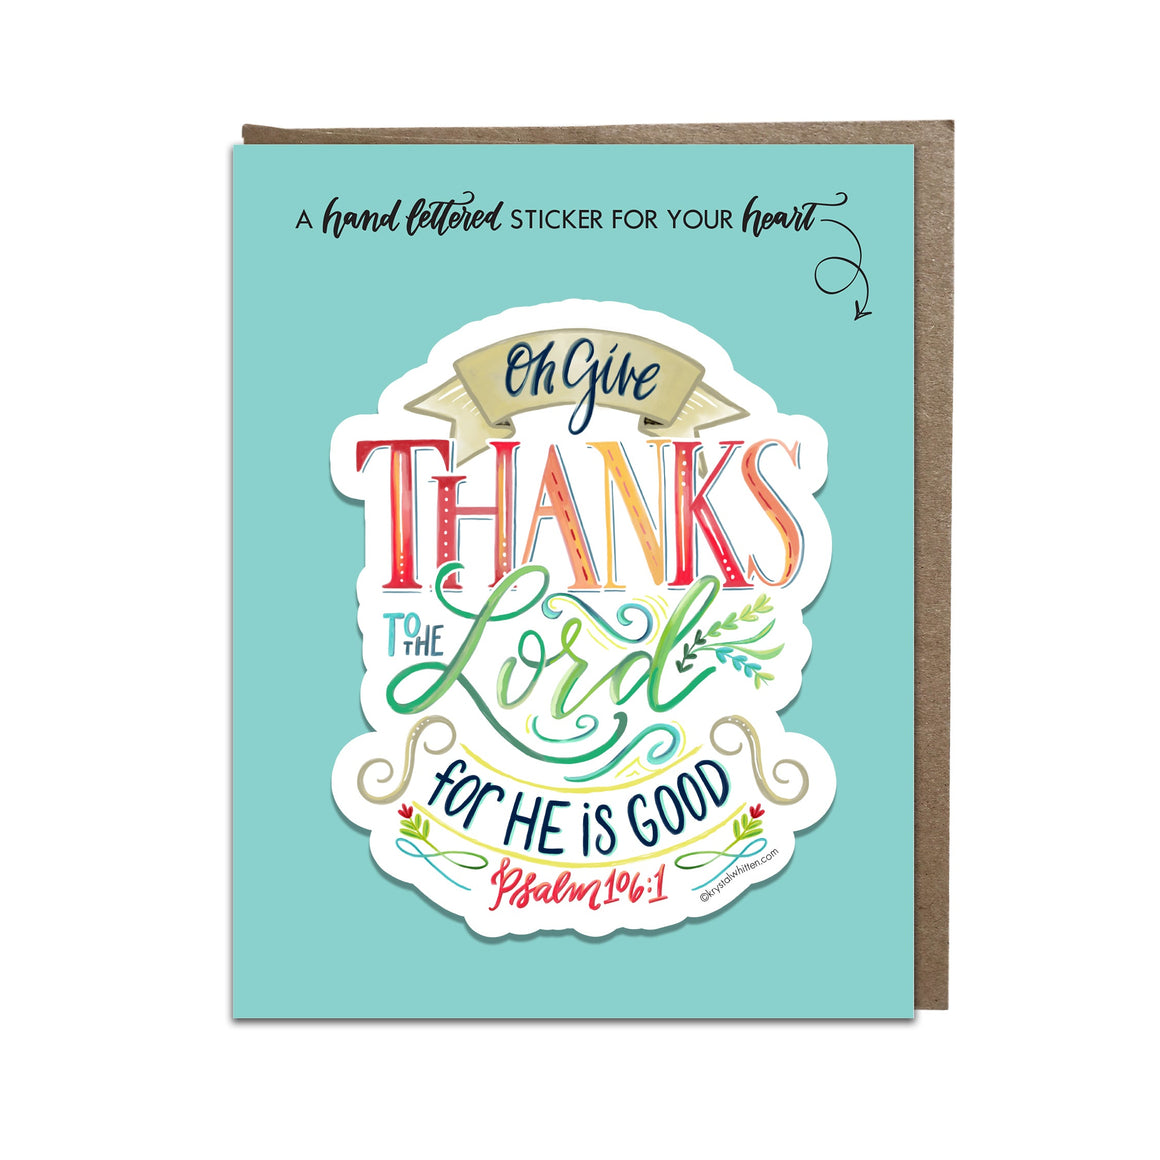 "Oh Give Thanks" sticker card